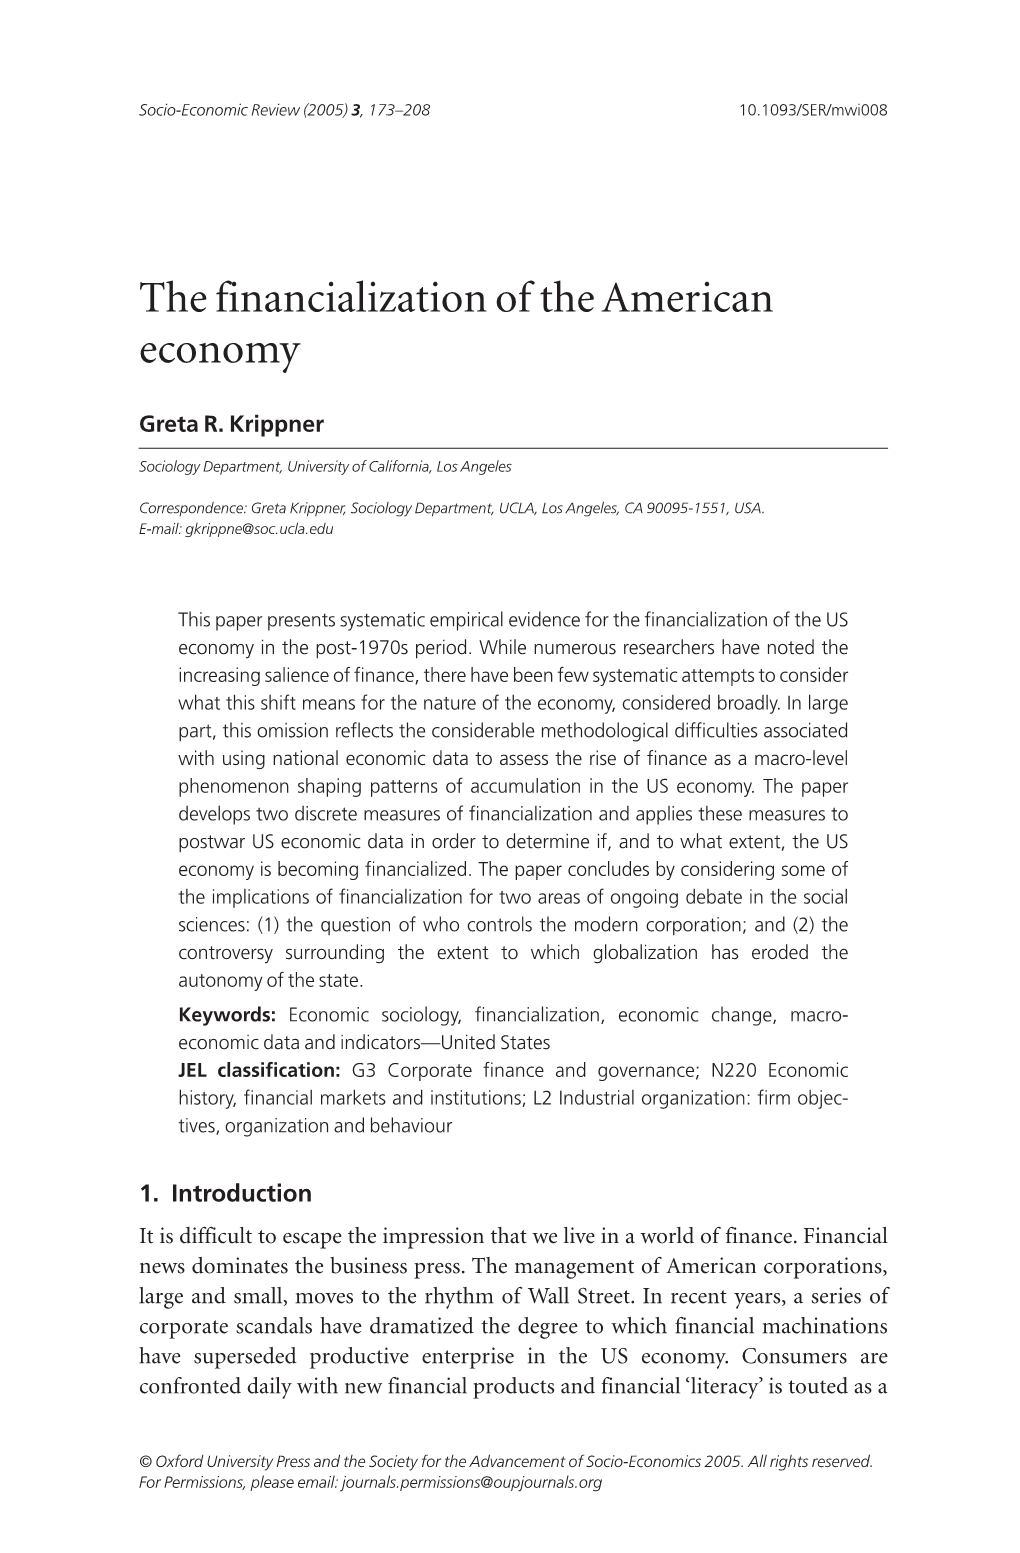 The Financialization of the American Economy